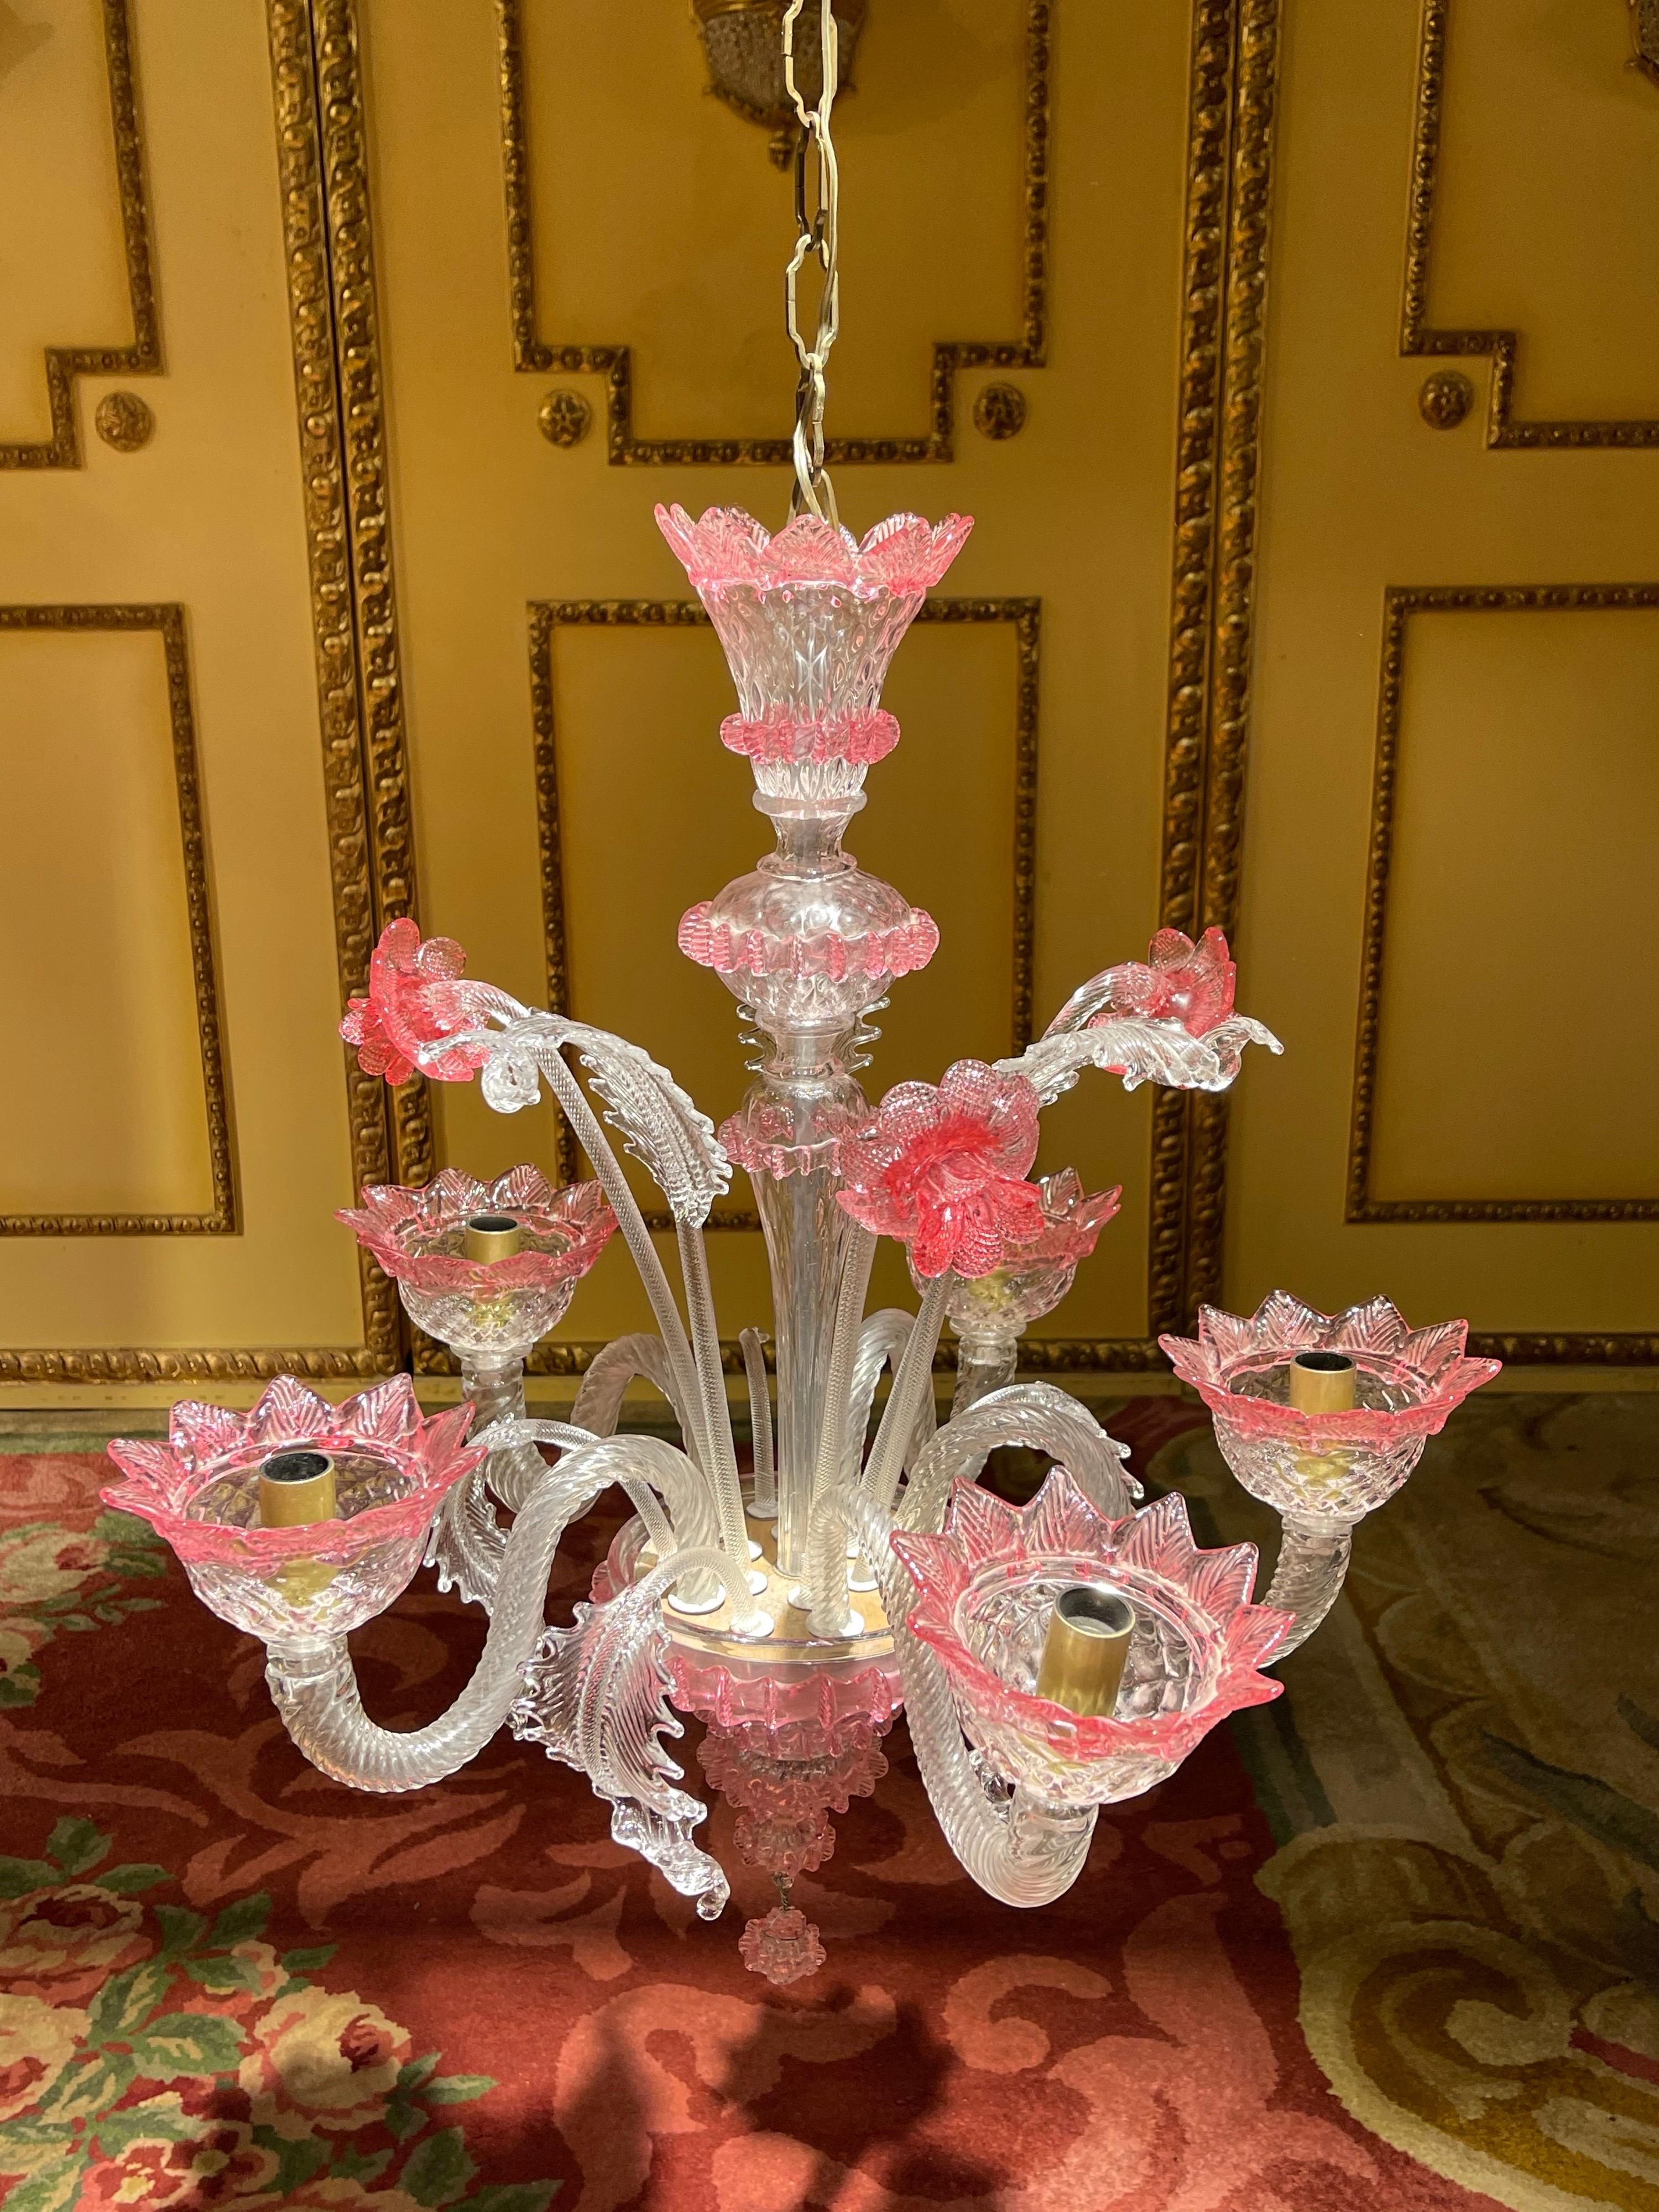 20th century Louis XV style Murano Italy chandelier ceiling luster

Antique Murano chandelier ceiling luster, Italy.
five-flame colorless glass with colorful powder melt. Central baluster surrounded by plastic flowers and foliage, as well as five